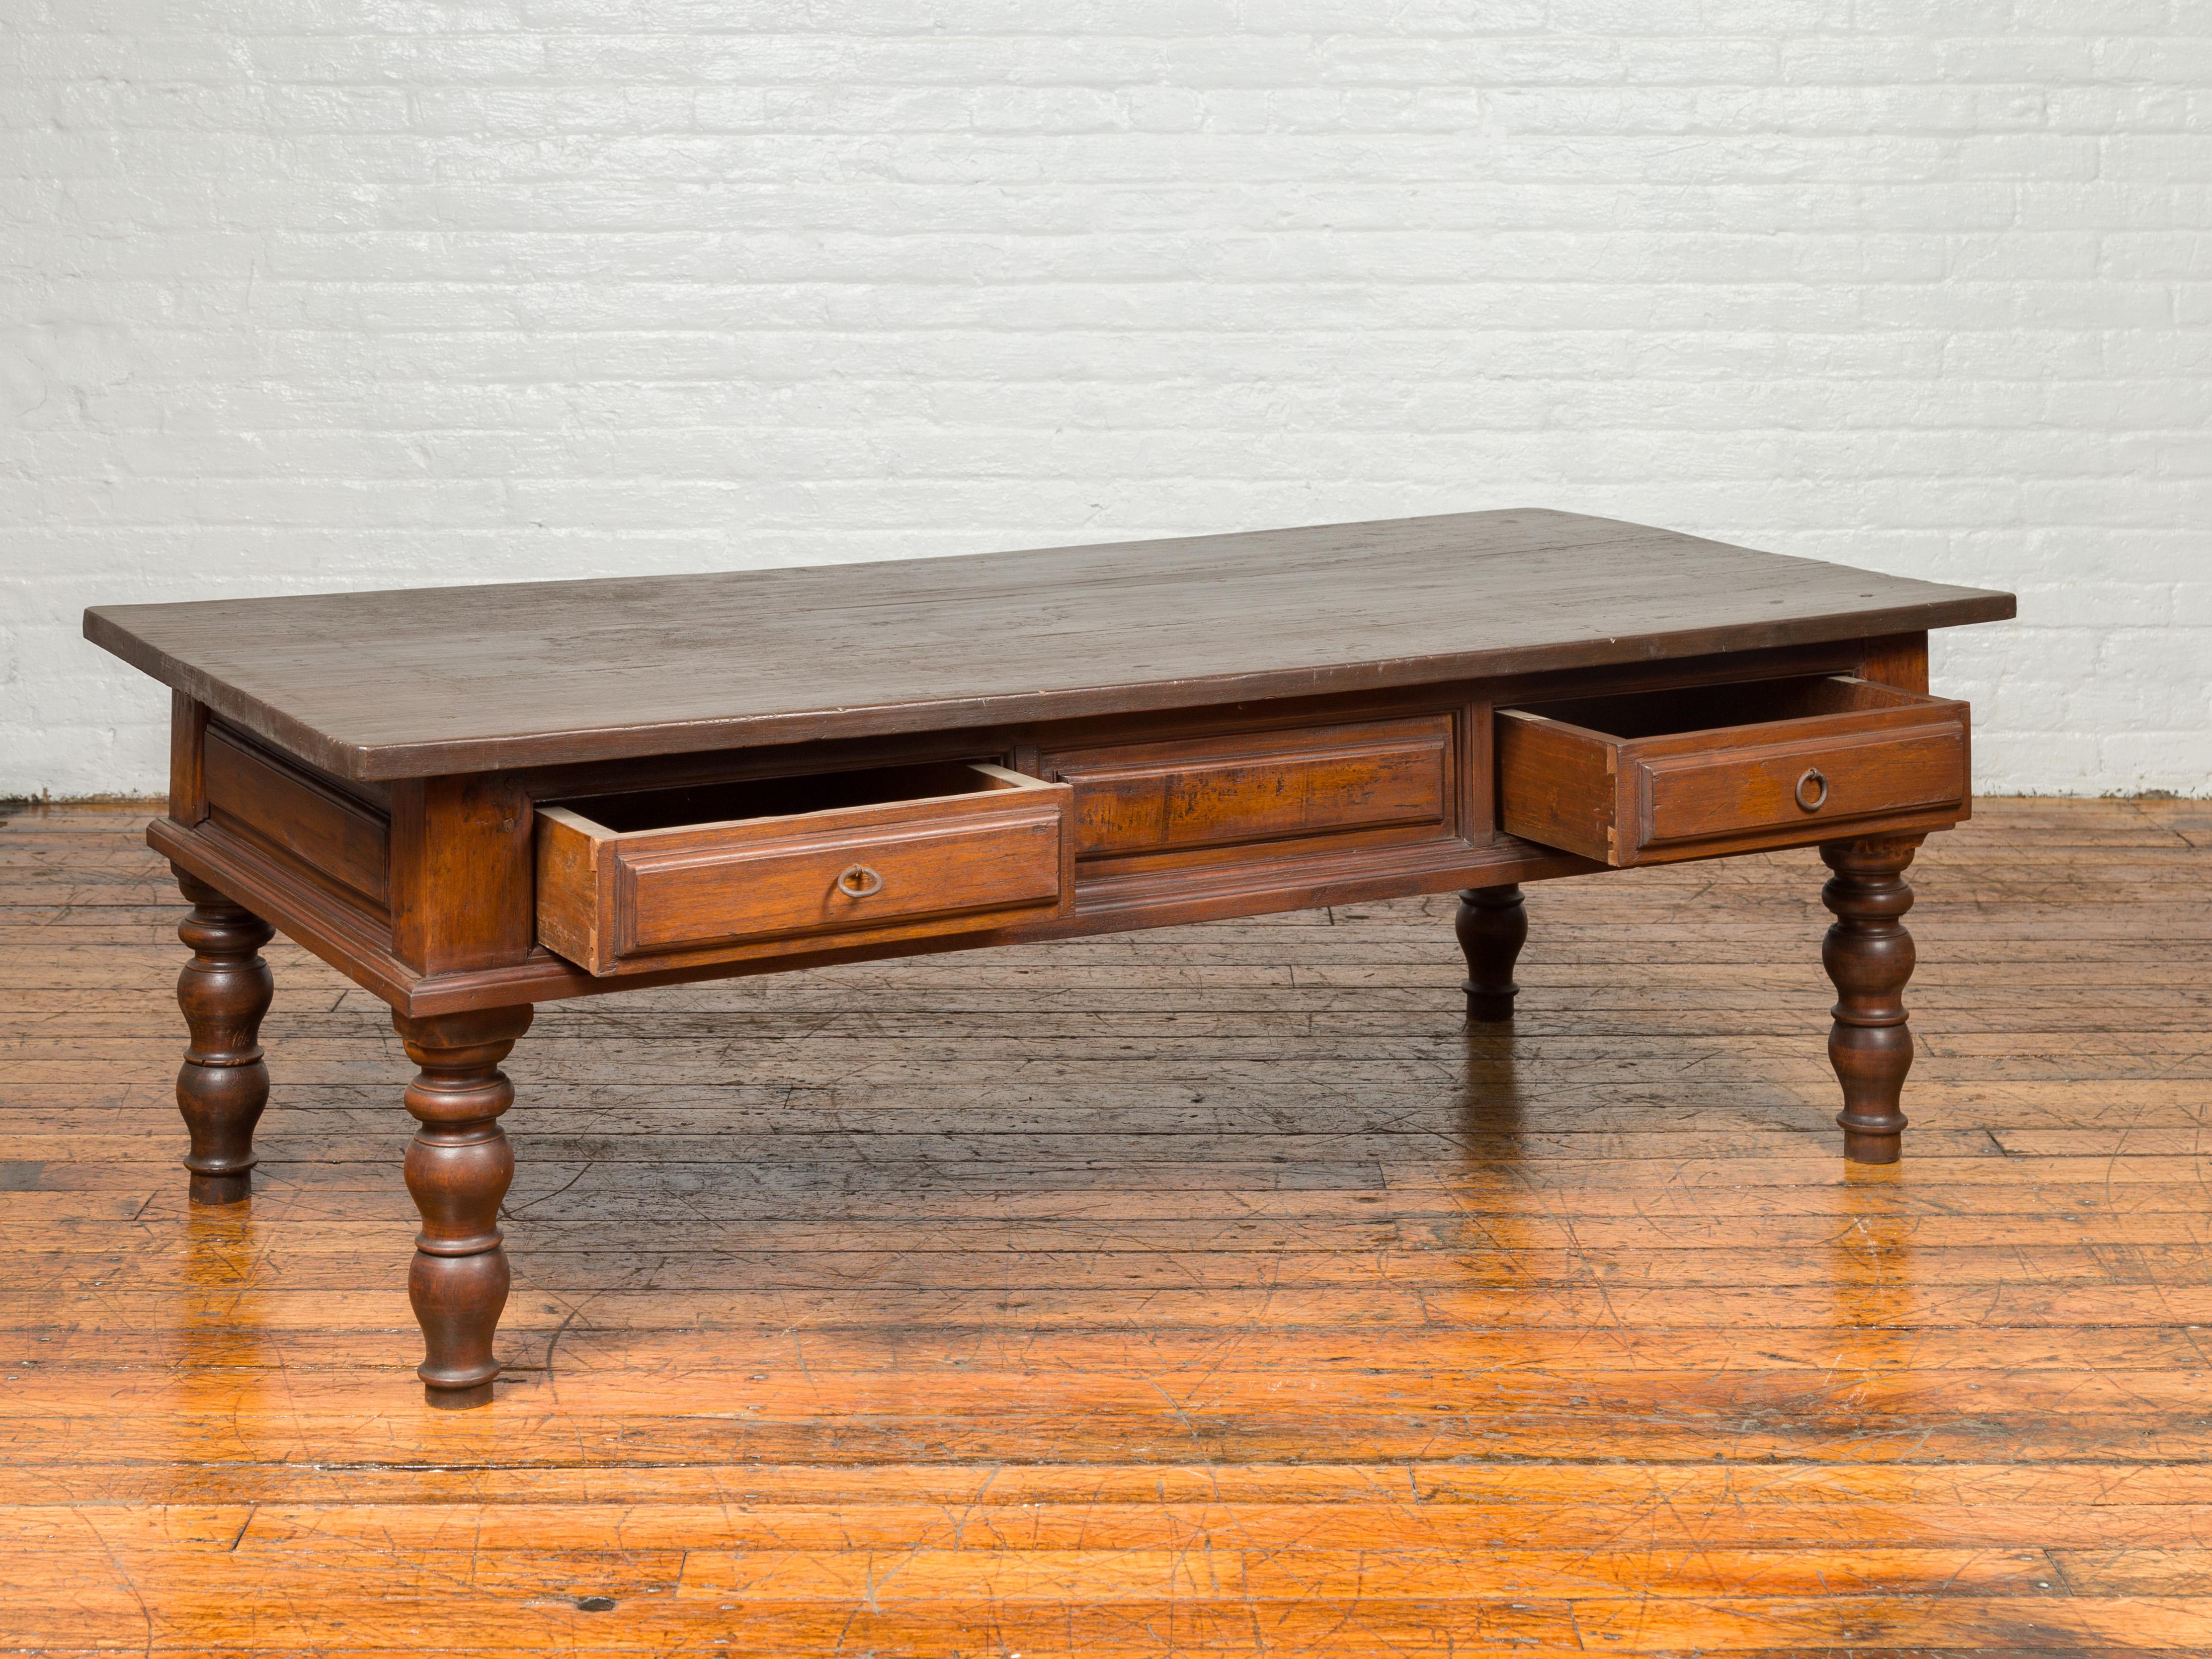 Wood Dutch Colonial Late 19th Century Long Coffee Table with Drawers and Turned Legs